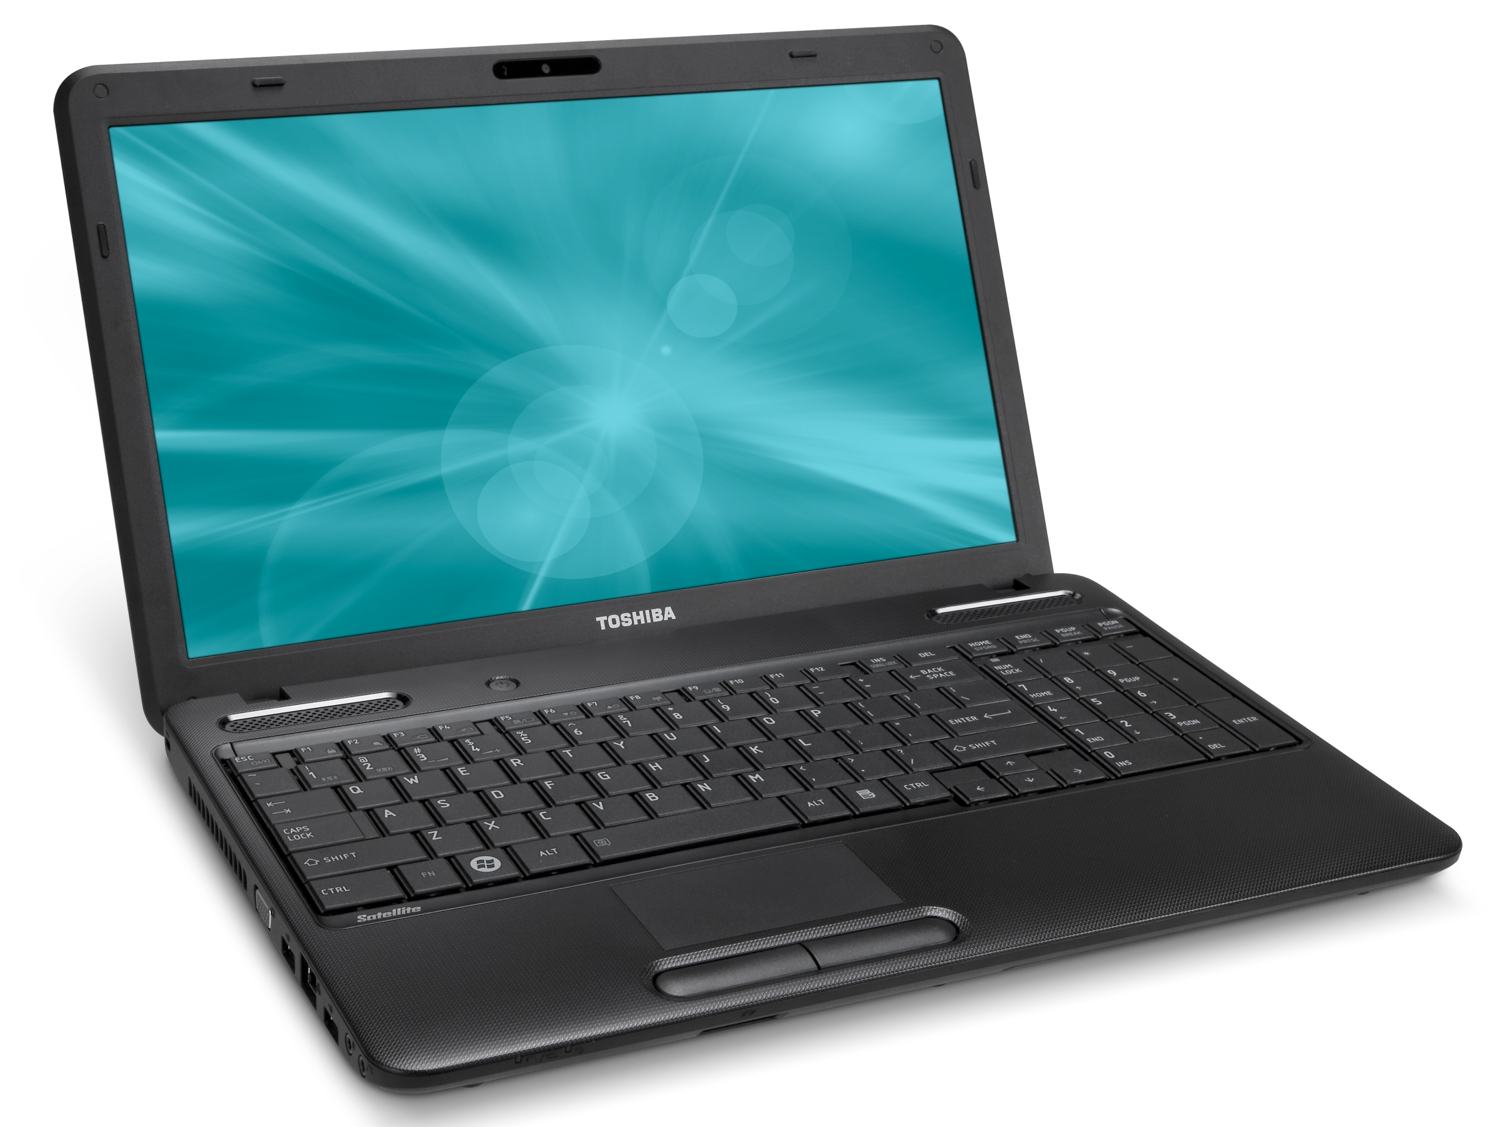 http://thetechjournal.com/wp-content/uploads/images/1110/1319098195-toshiba-satellite-c655ds5336-156inch-laptop-2.jpg